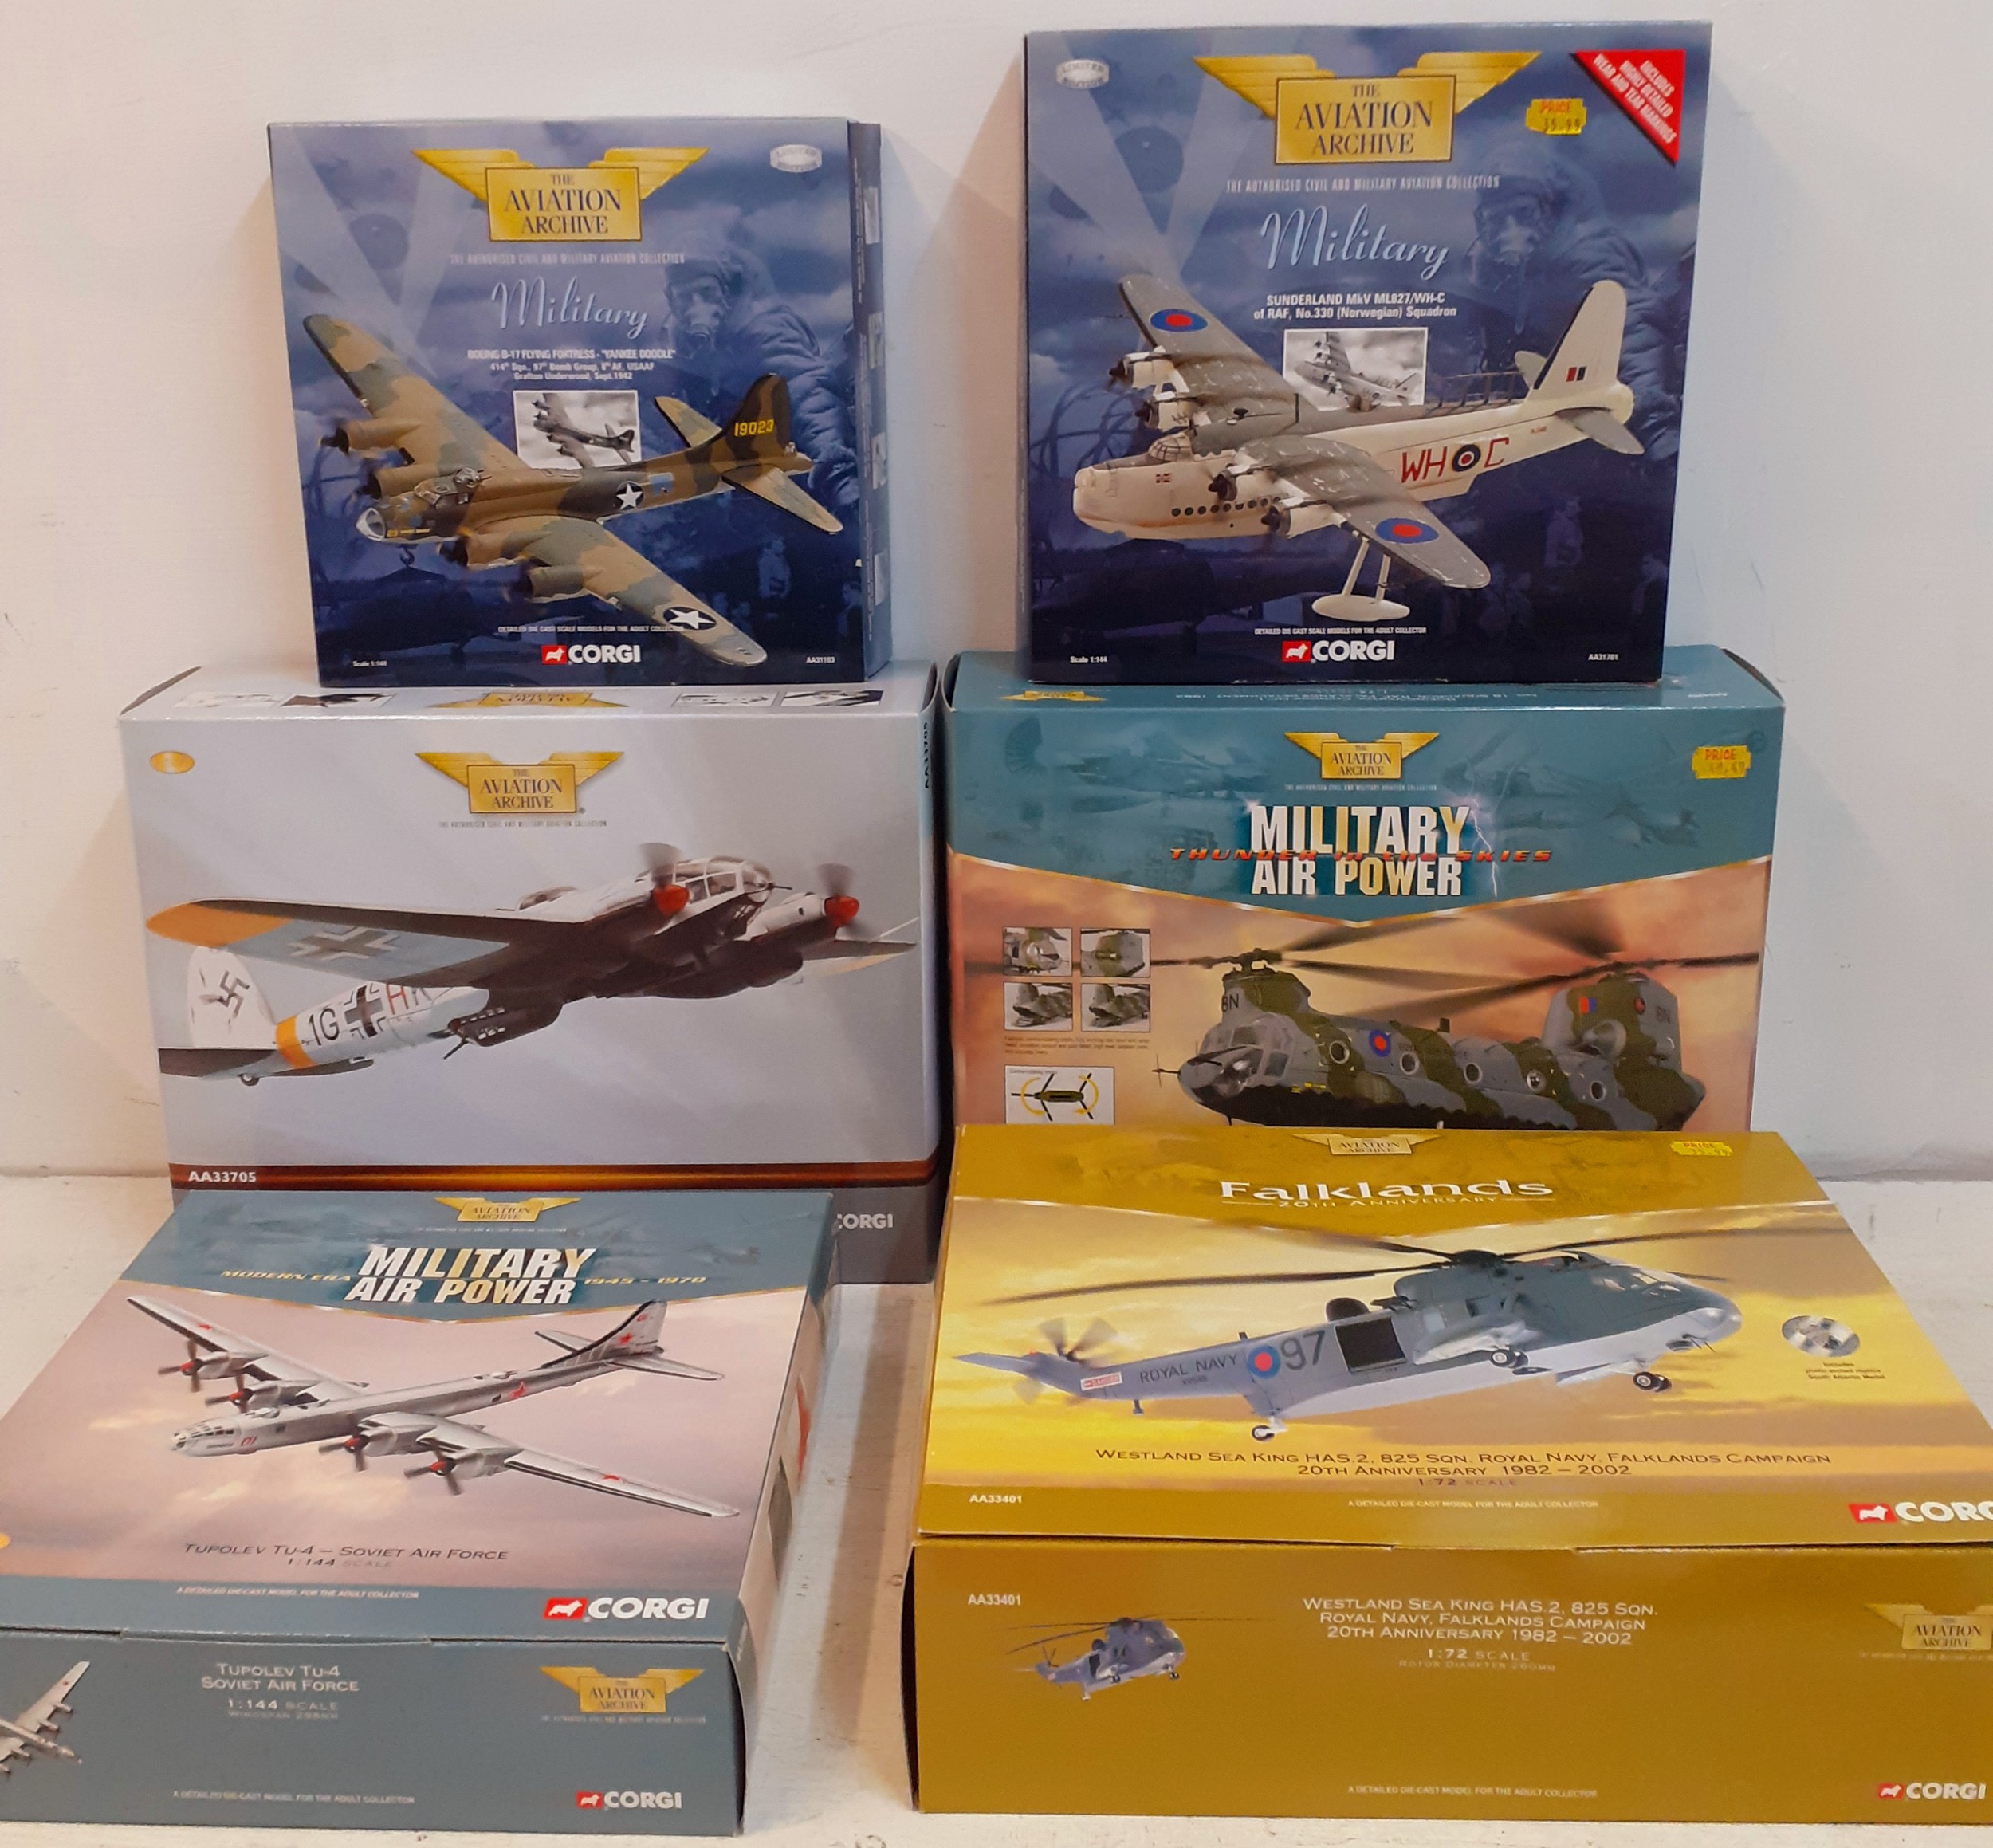 Corgi-Aviation Archive, 6 scale 1:72 models to include AA numbers 31103, 31701, 33705, 33401,